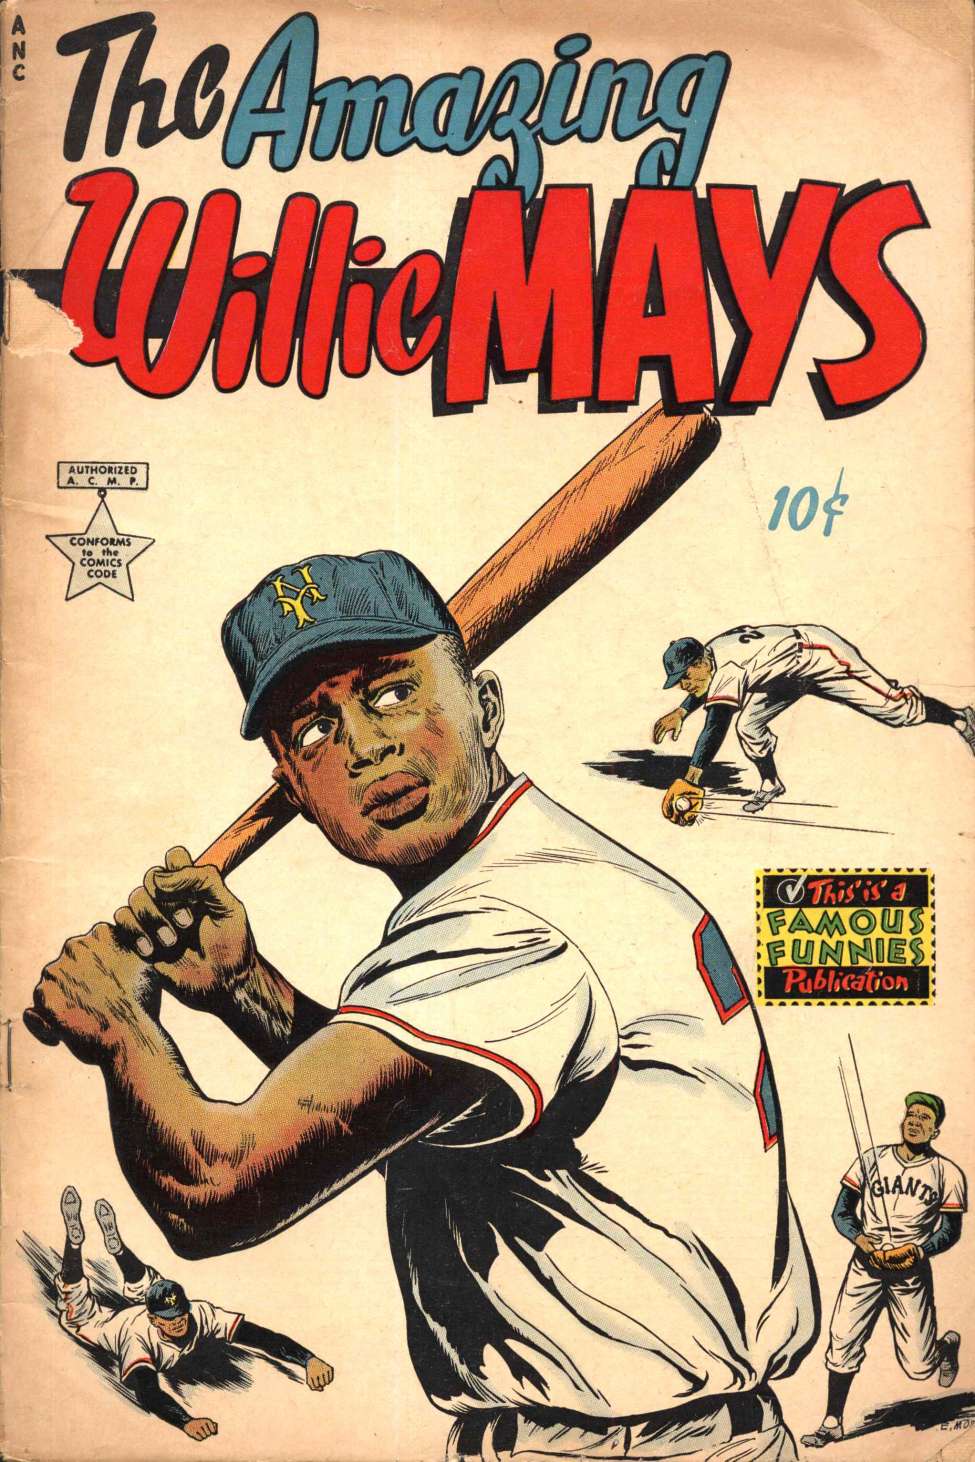 Comic Book Cover For The Amazing Willie Mays